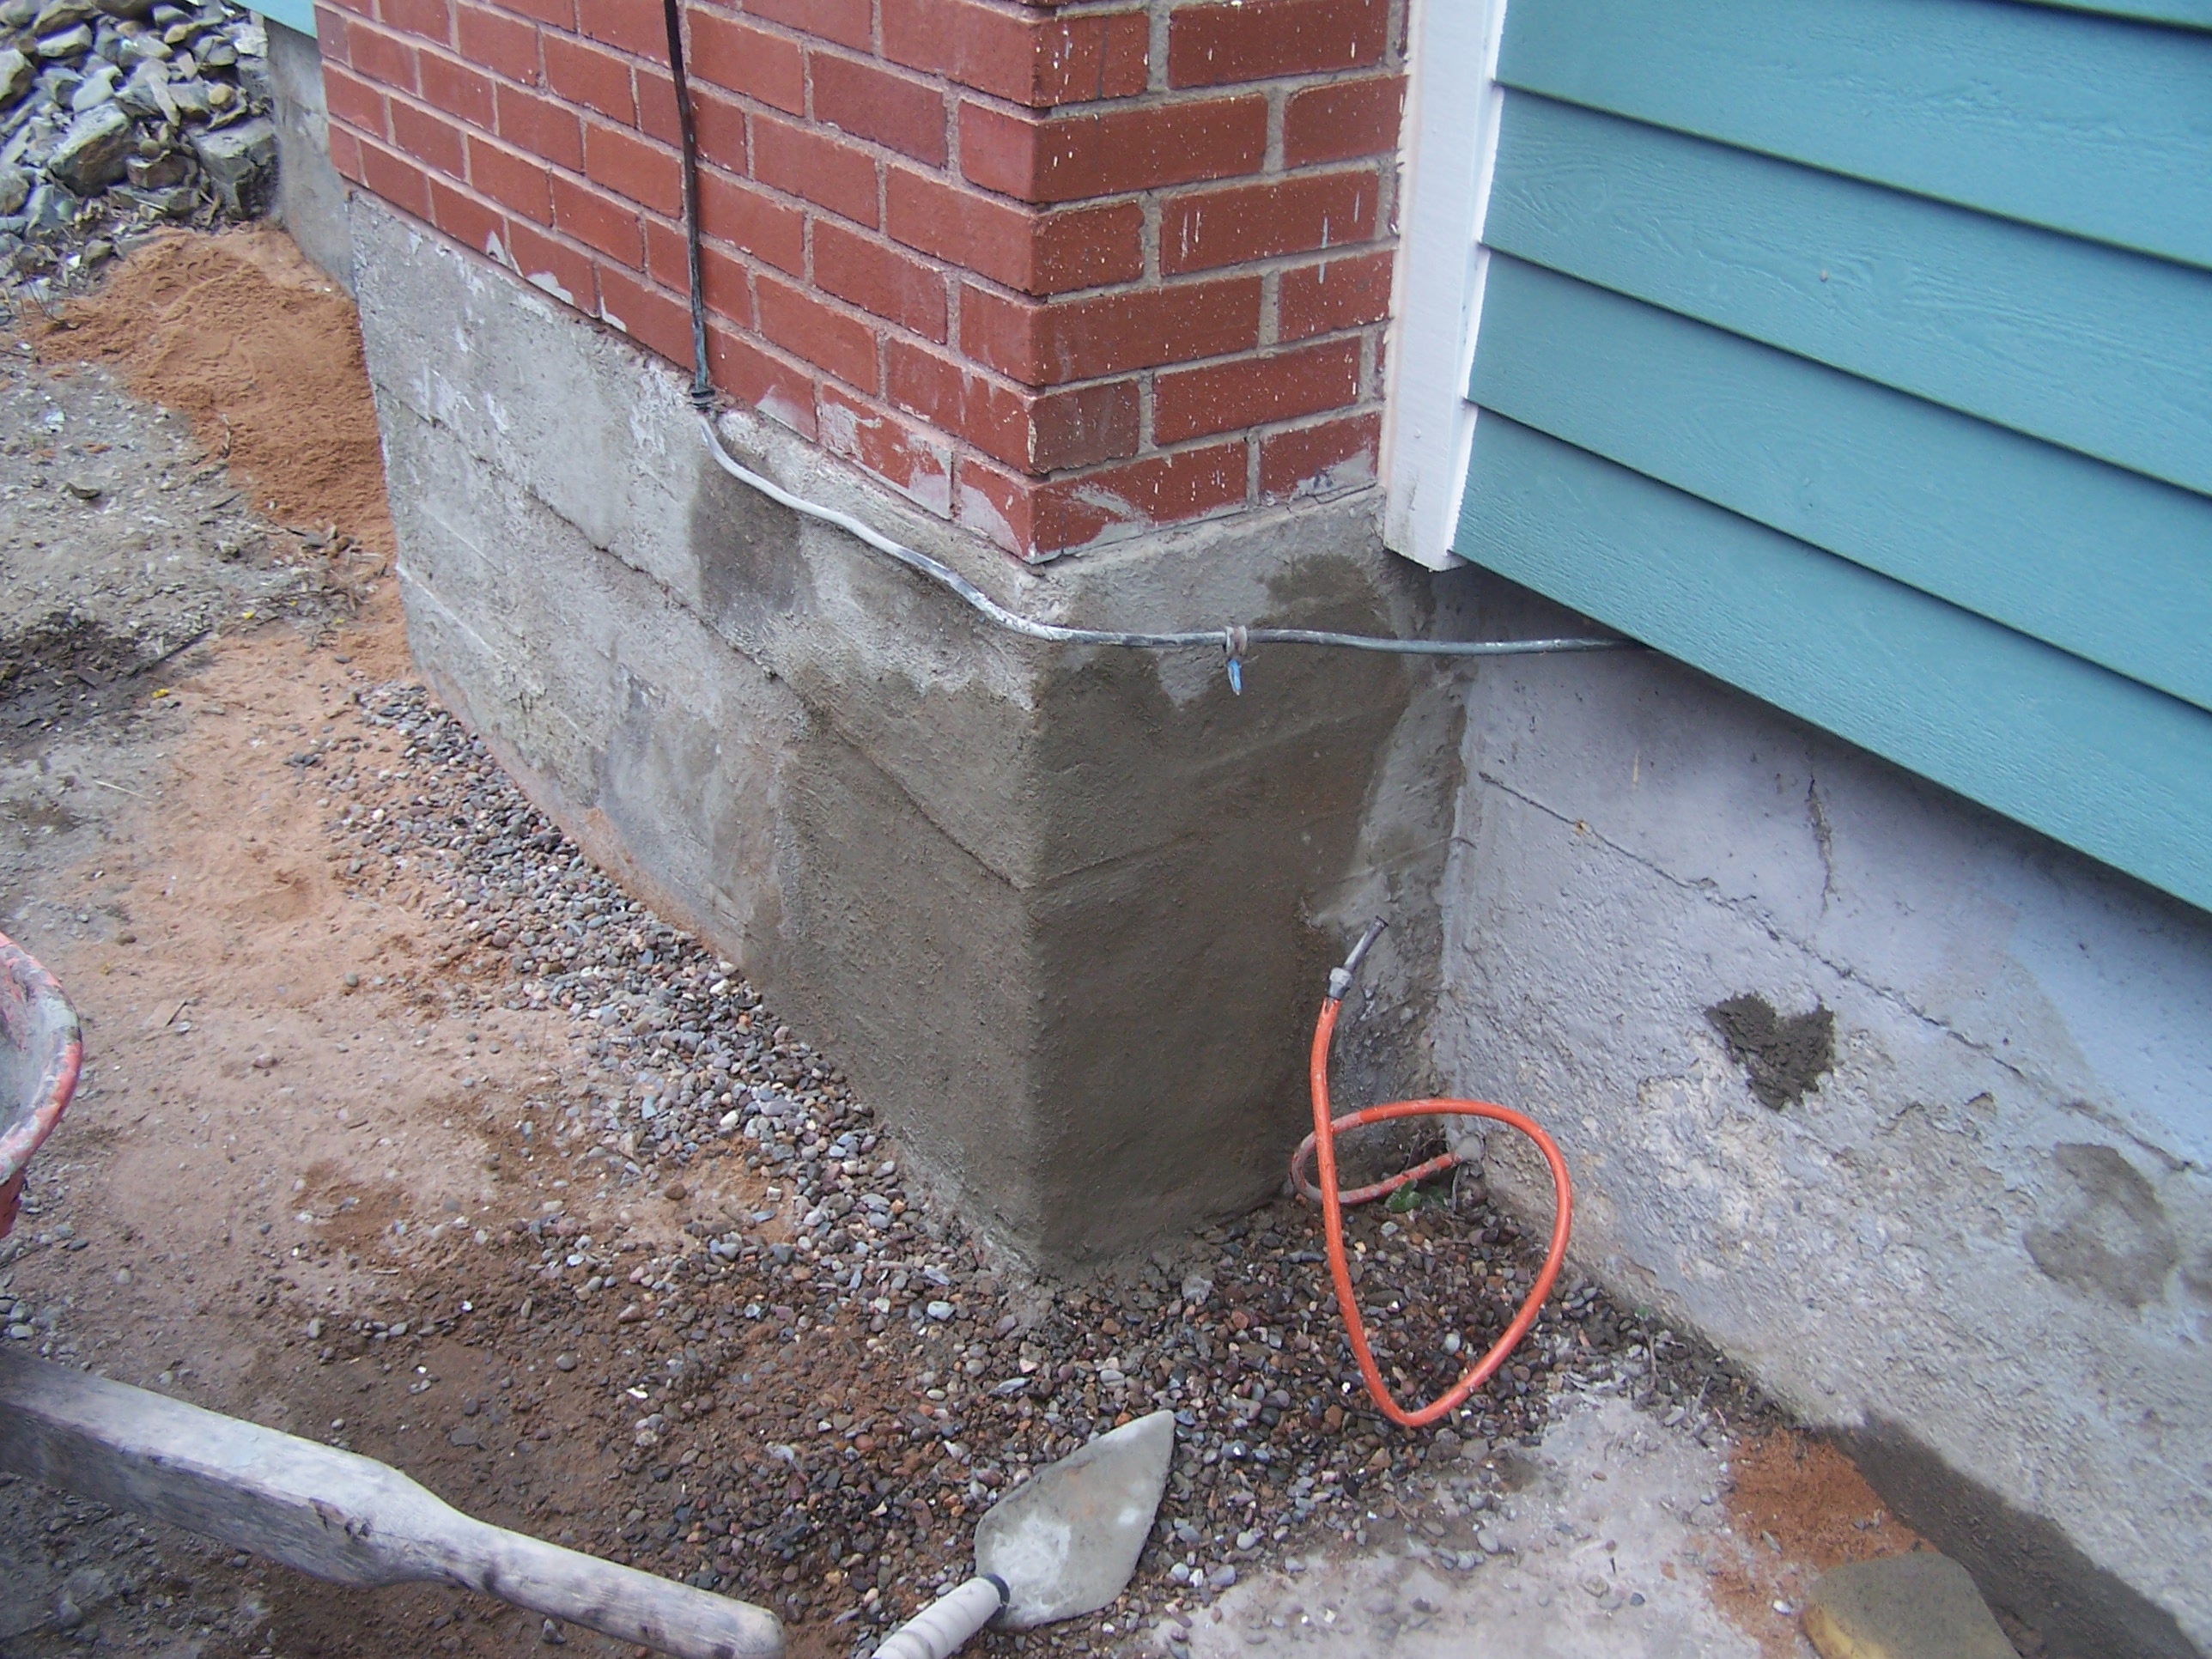 image of concrete foundation-concrete foundation repairs completed in South End Halifax, NS by Pro Chimney Services based in Halifax, NS is providing their concrete foundation repair services to all of the Halifax-Dartmouth Regional Municipality, Bedford, Sackville, Mount Uniacke, Hantsport, Windsor, Wolfville, Kentville, Chester Basin, Mahone Bay, Lunenburg, Bridgewater, Liverpool, Fall River, Wellington, Enfield, Elmsdale, Brookfield, Truro, Musquodoboit Harbour & surrounding areas.